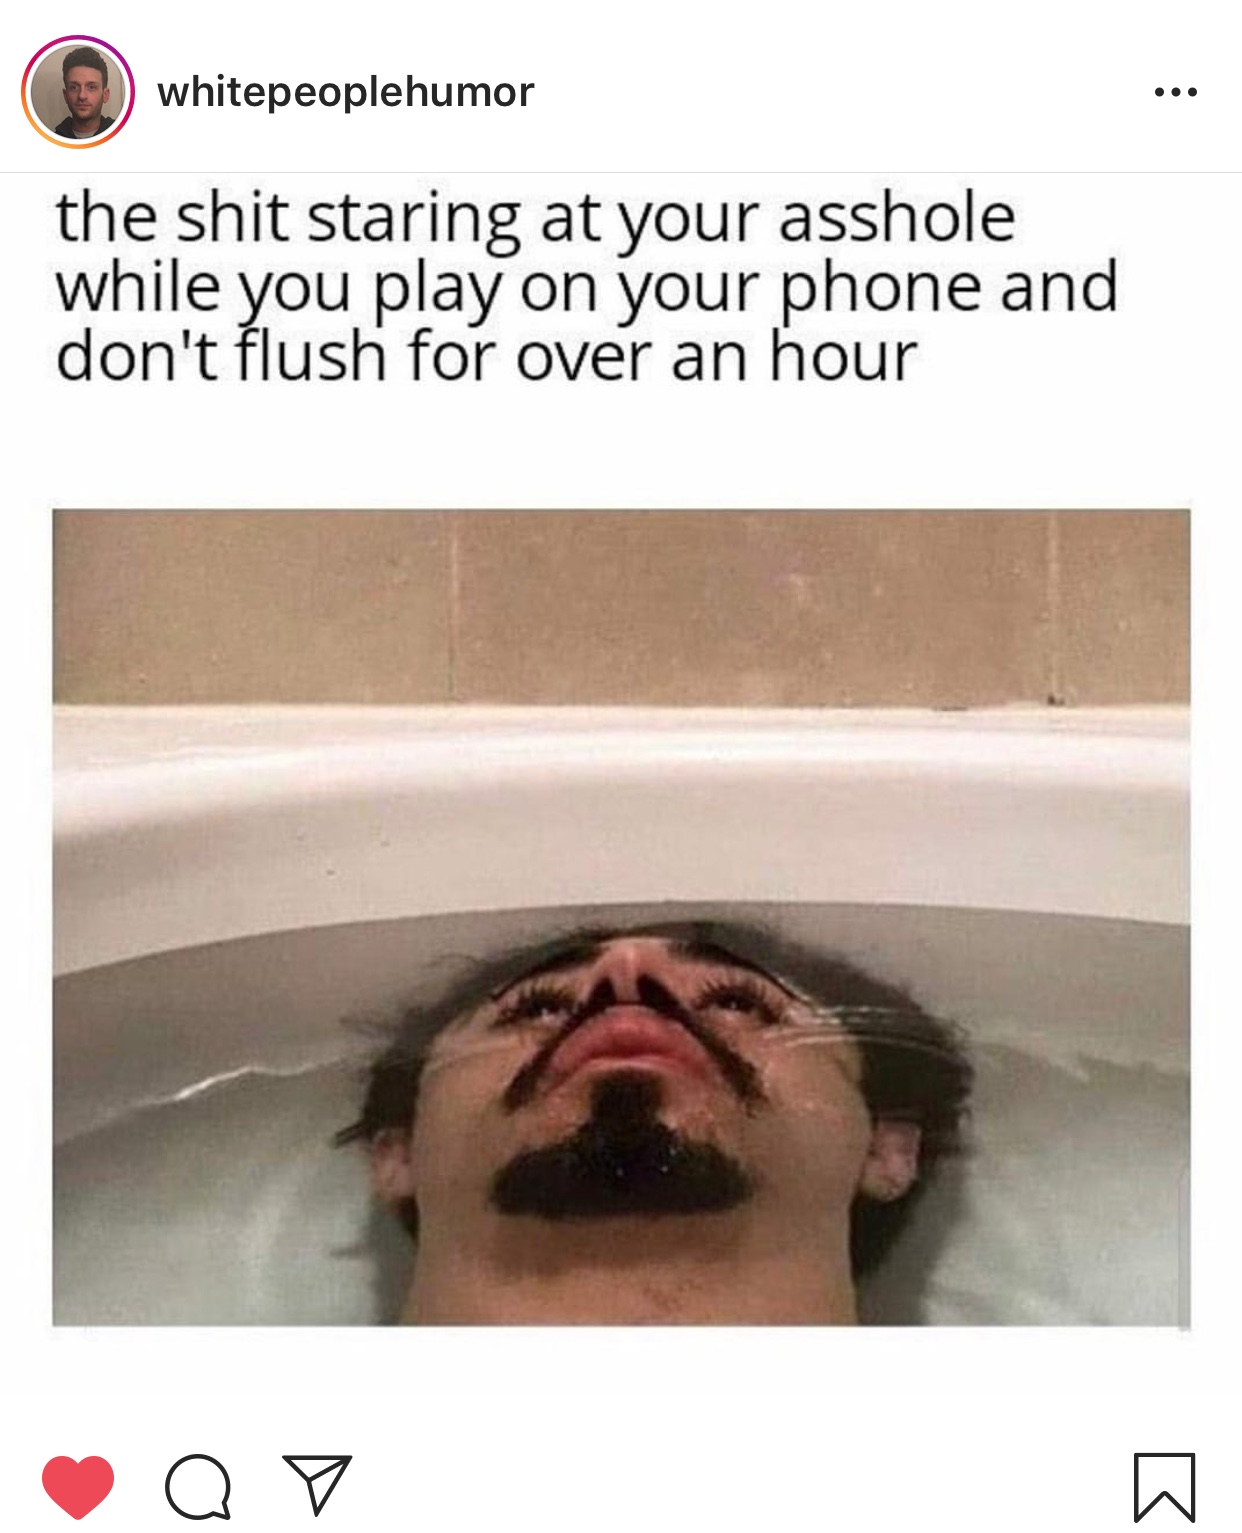 jaw - whitepeoplehumor the shit staring at your asshole while you play on your phone and don't flush for over an hour Q